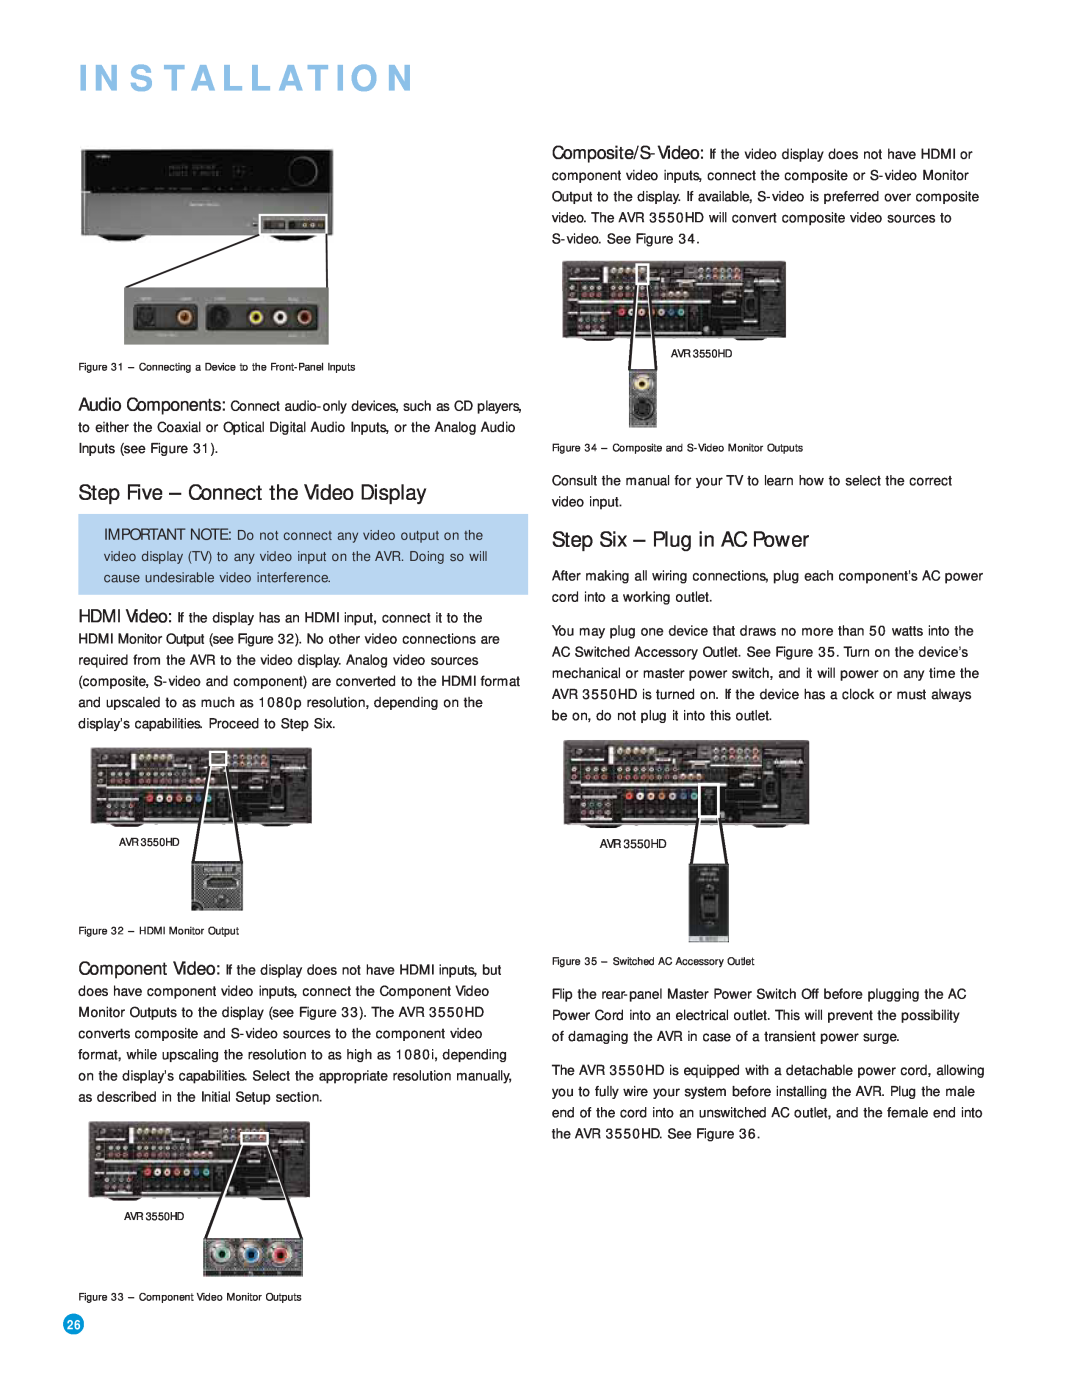 Harman-Kardon AVR 3550HD owner manual Step Five – Connect the Video Display, Step Six – Plug in AC Power, Installation 